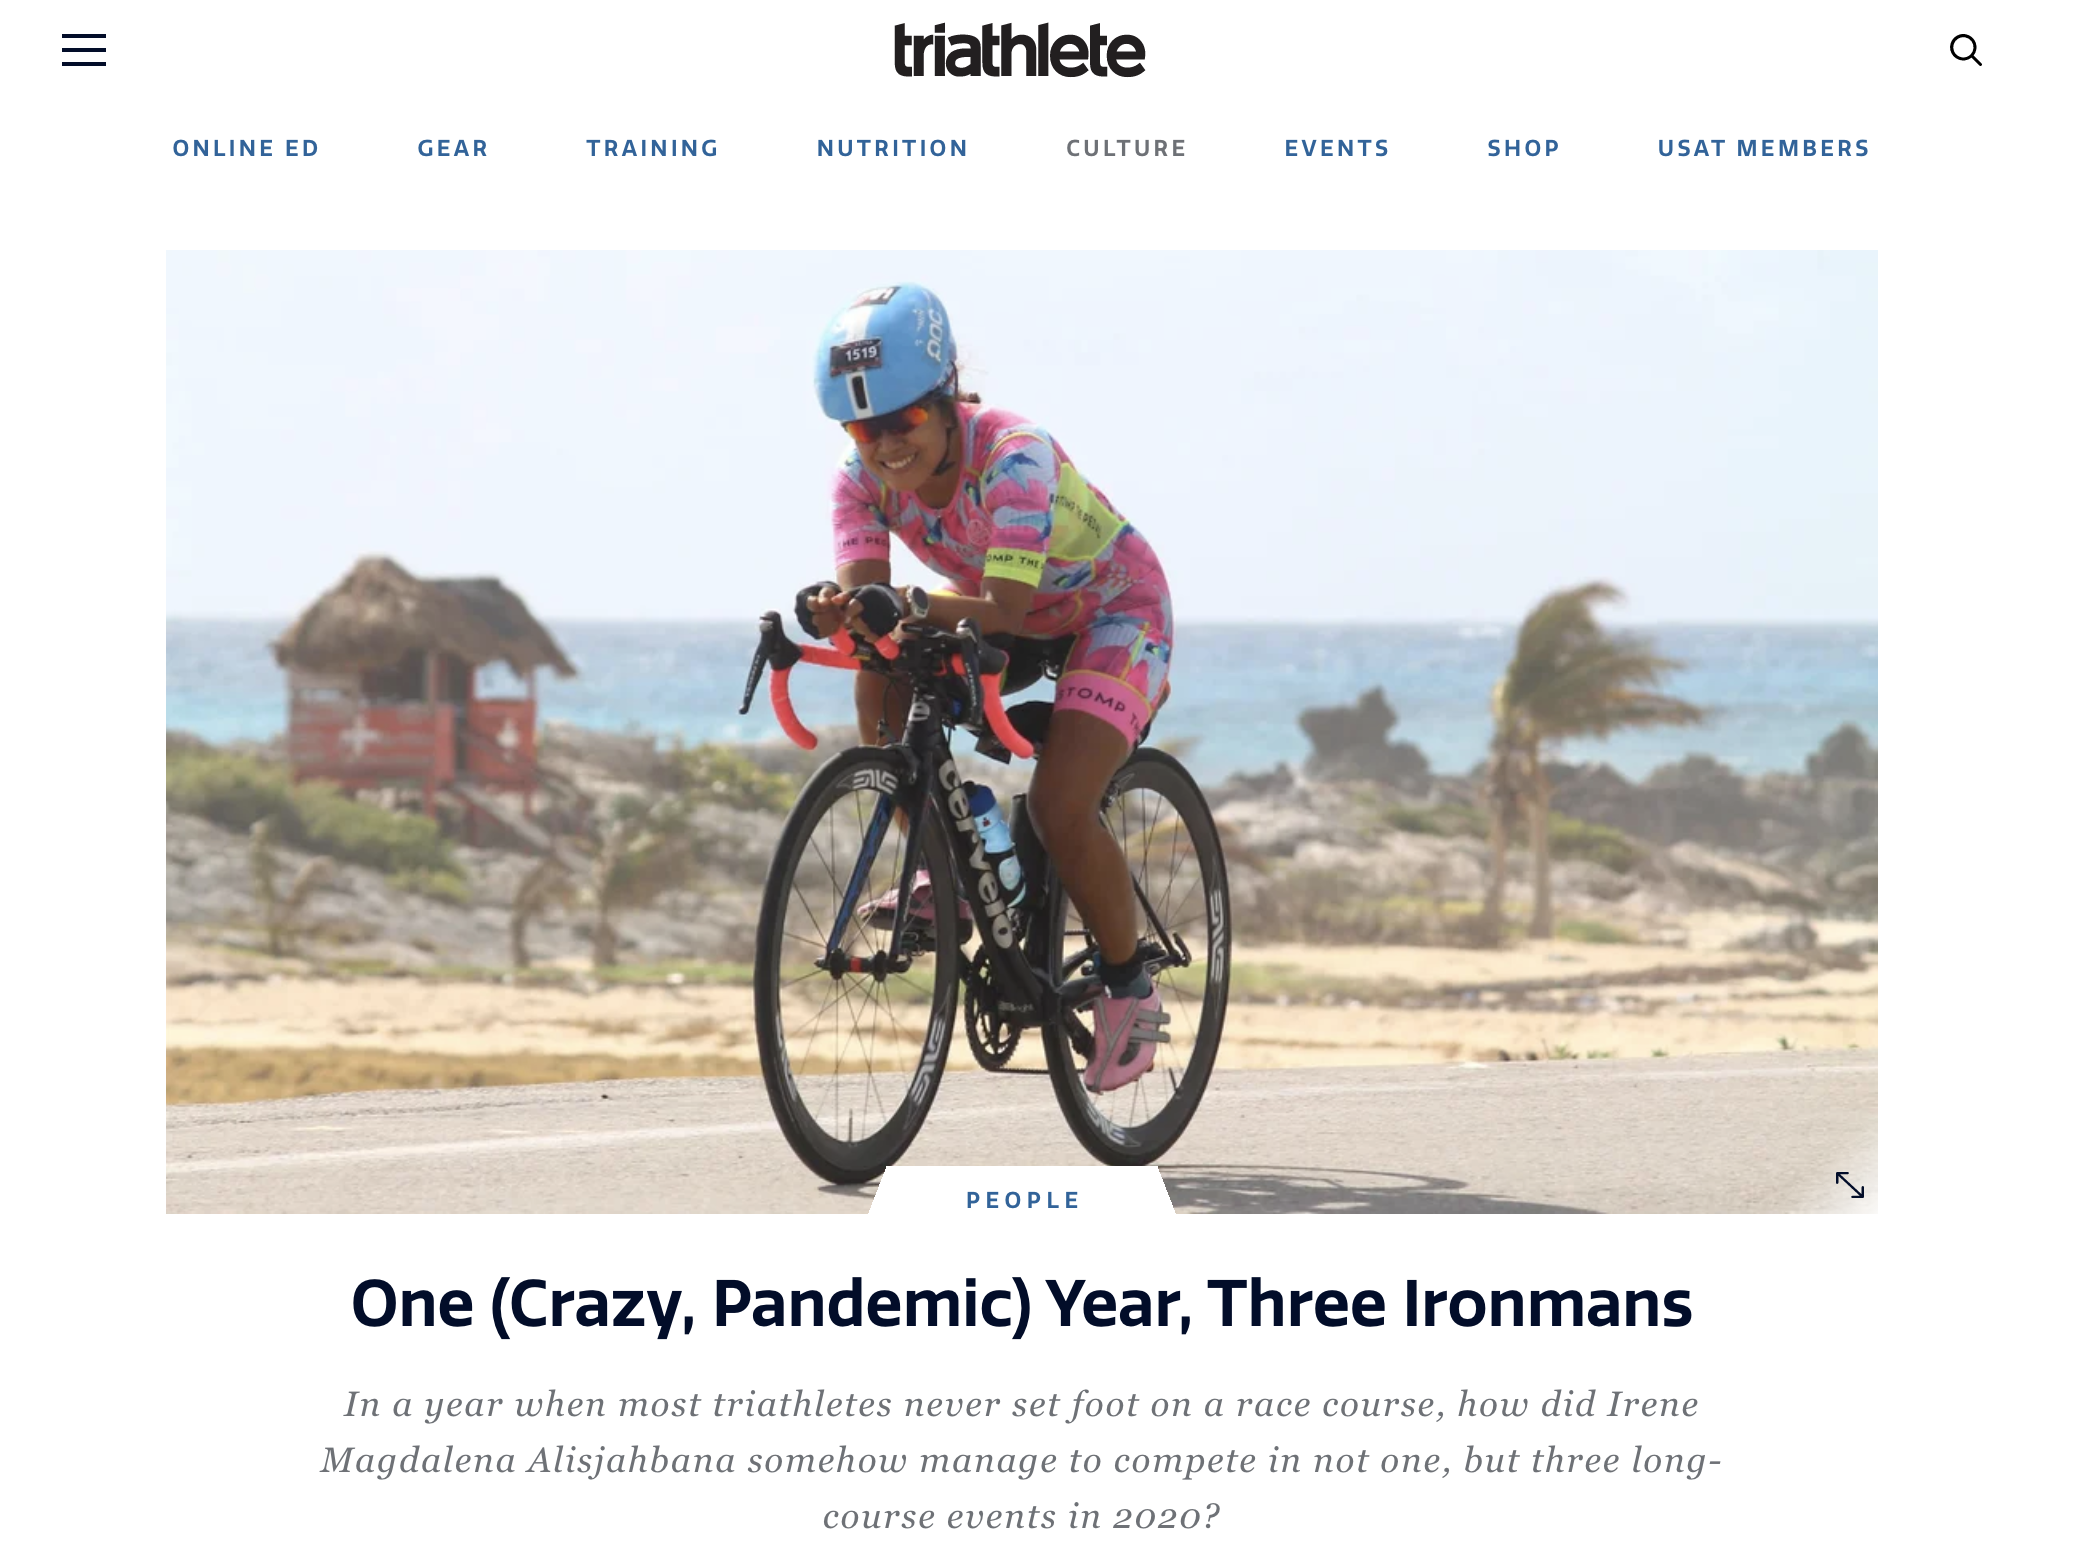 One (Crazy, Pandemic) Year, Three Ironmans